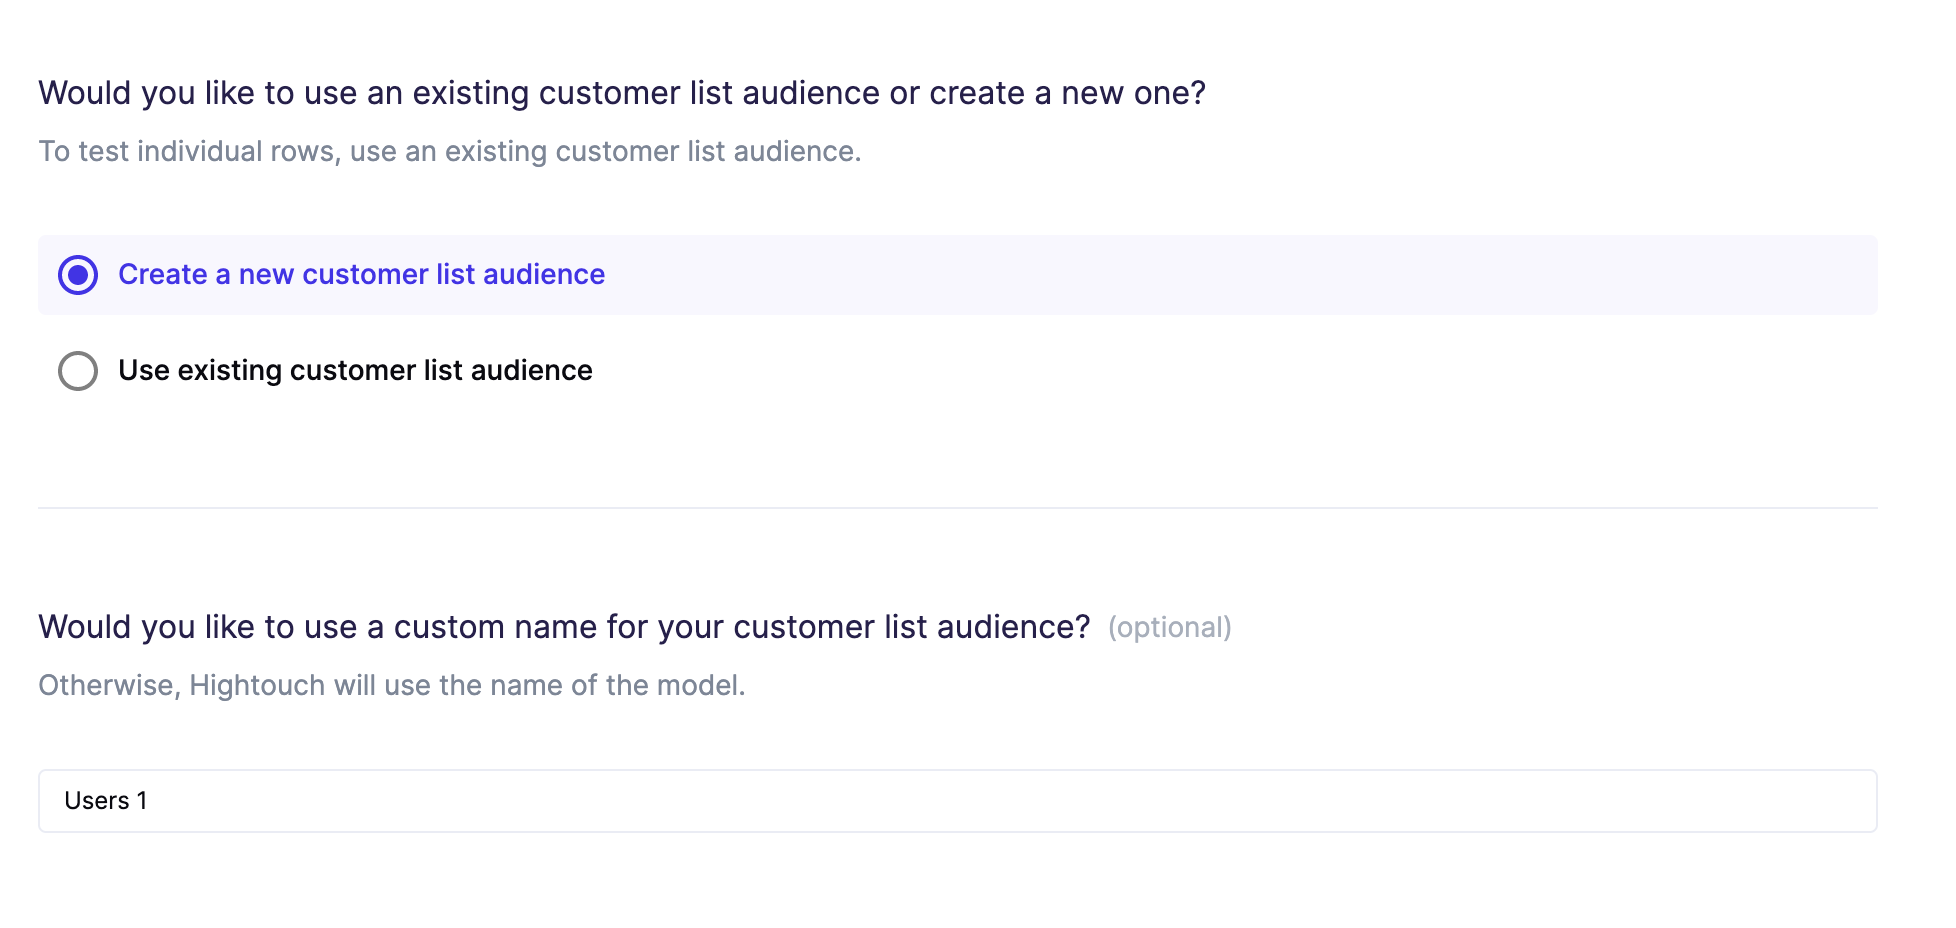 Creating a new customer list audience